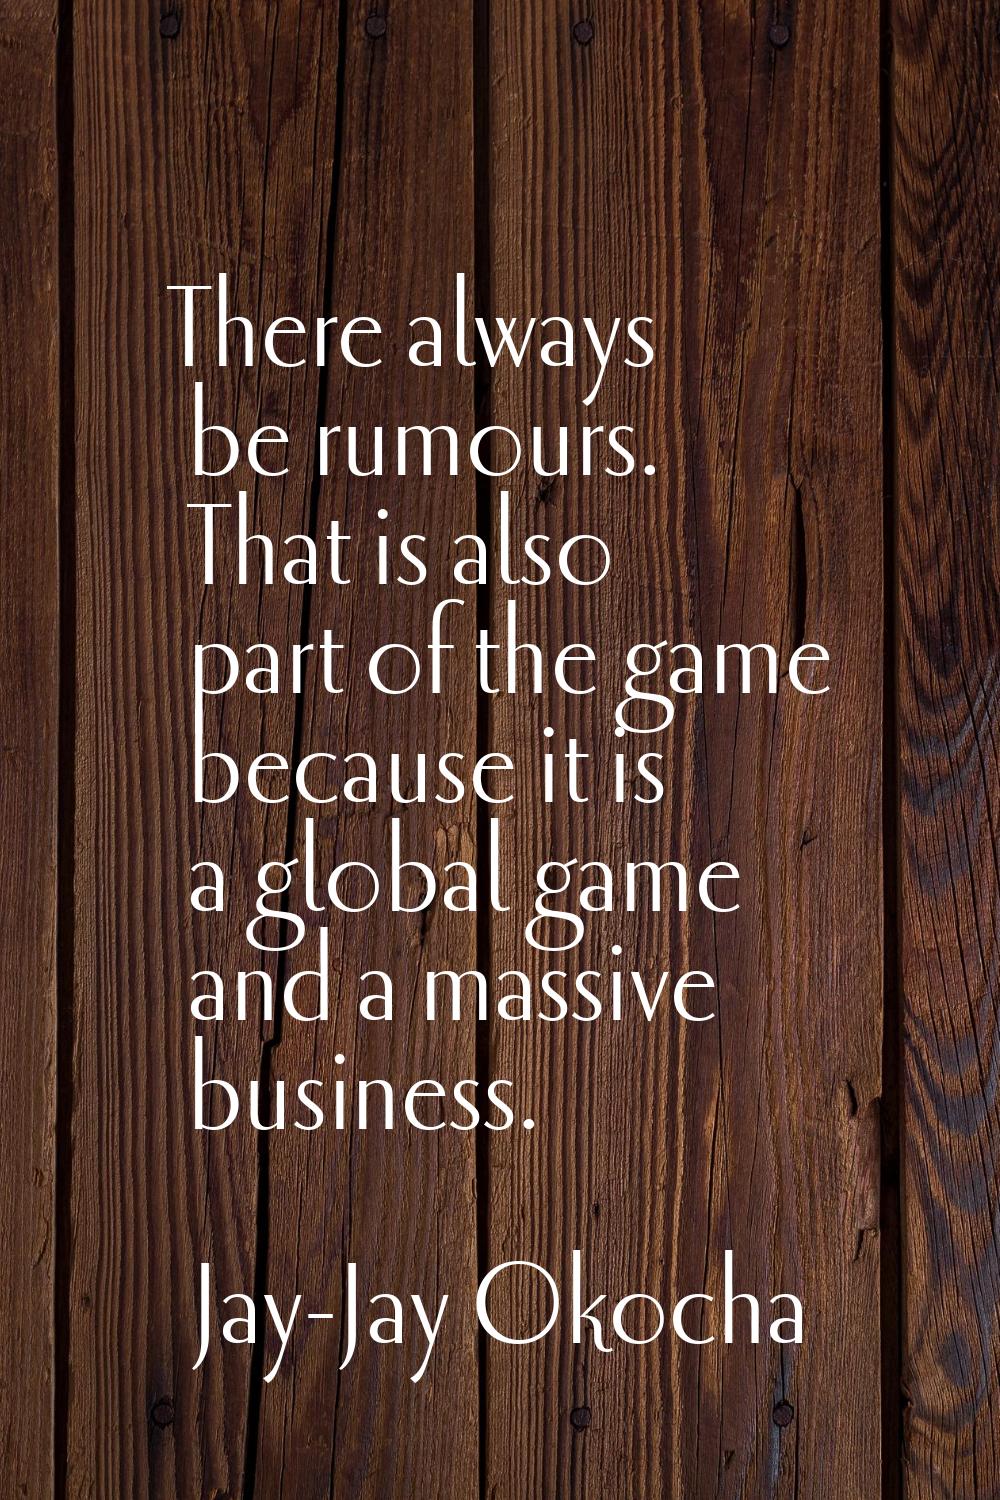 There always be rumours. That is also part of the game because it is a global game and a massive bu